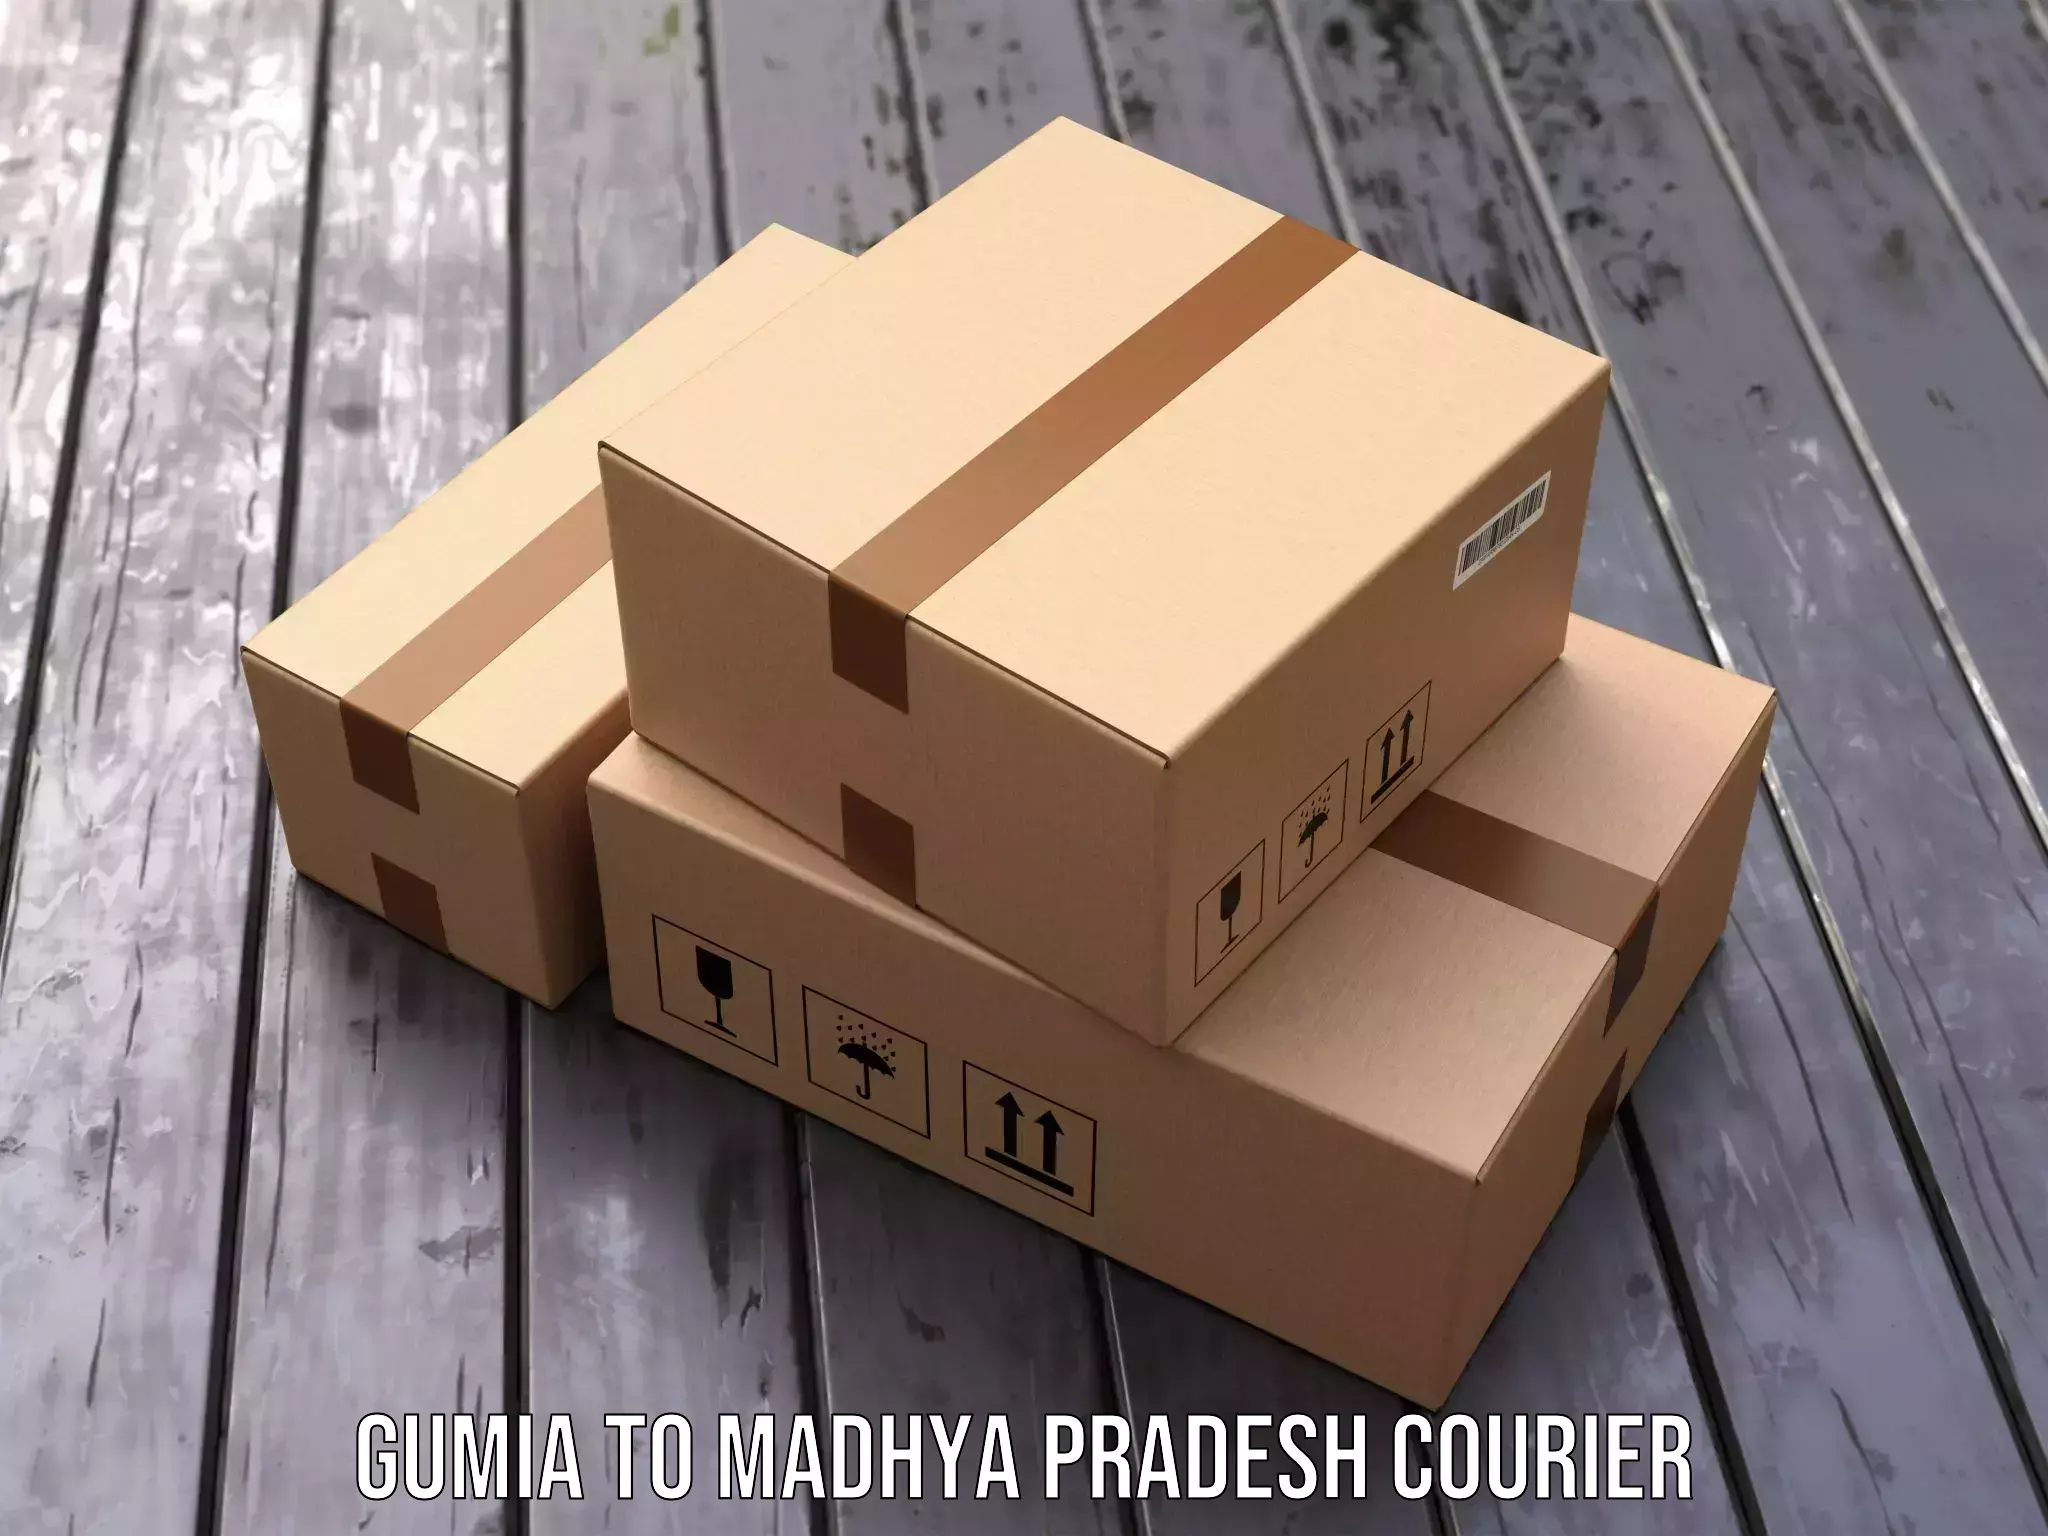 Multi-national courier services Gumia to Chand Chaurai